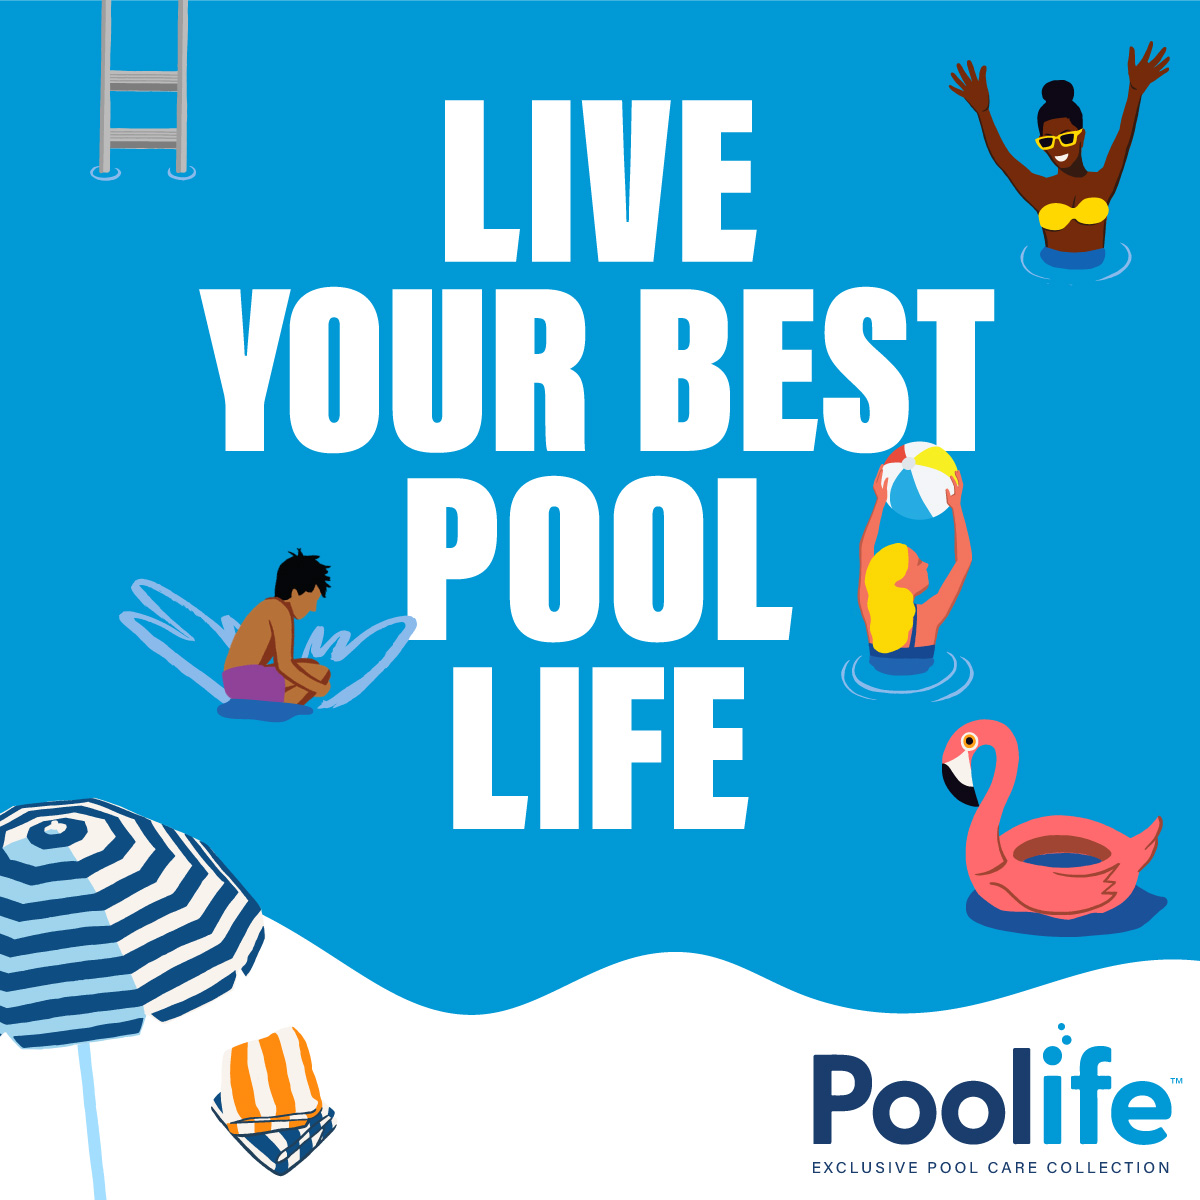 Live your best pool life